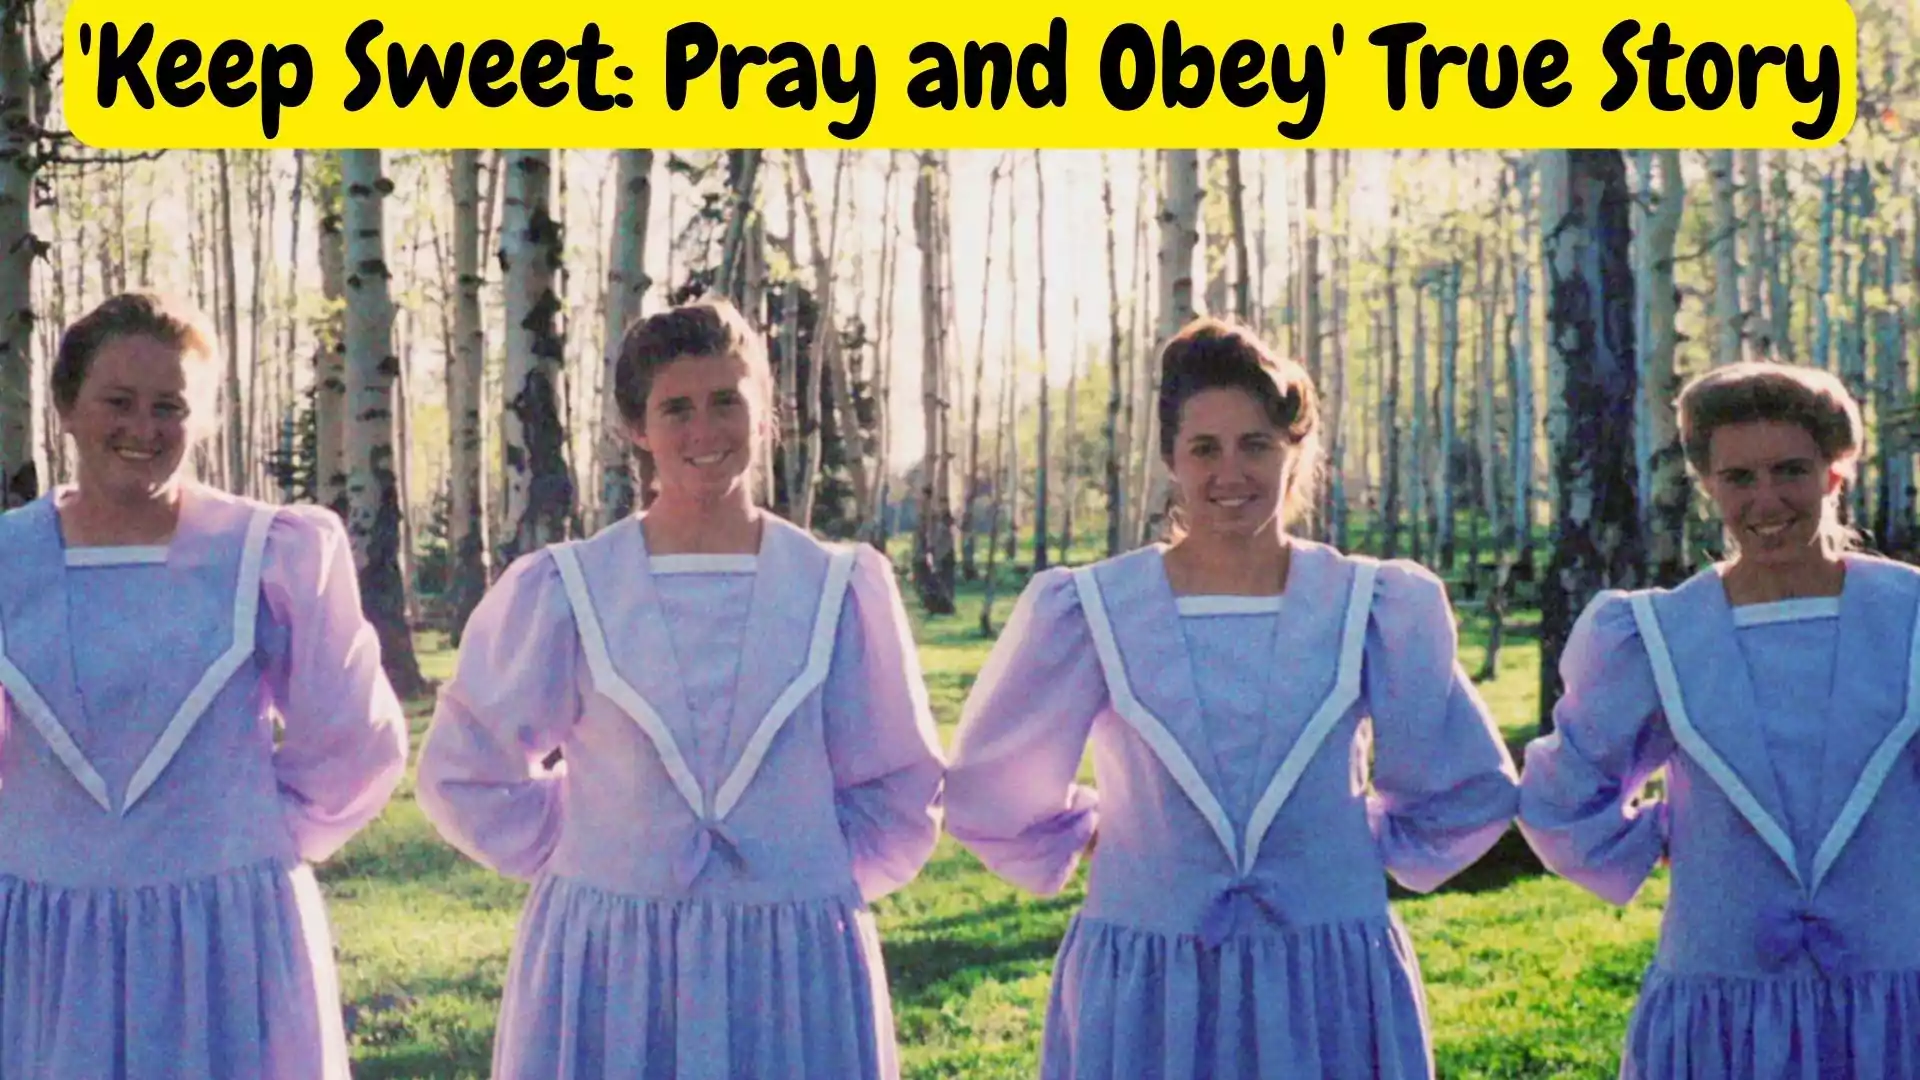 Netflix 'Keep Sweet: Pray and Obey' True Story